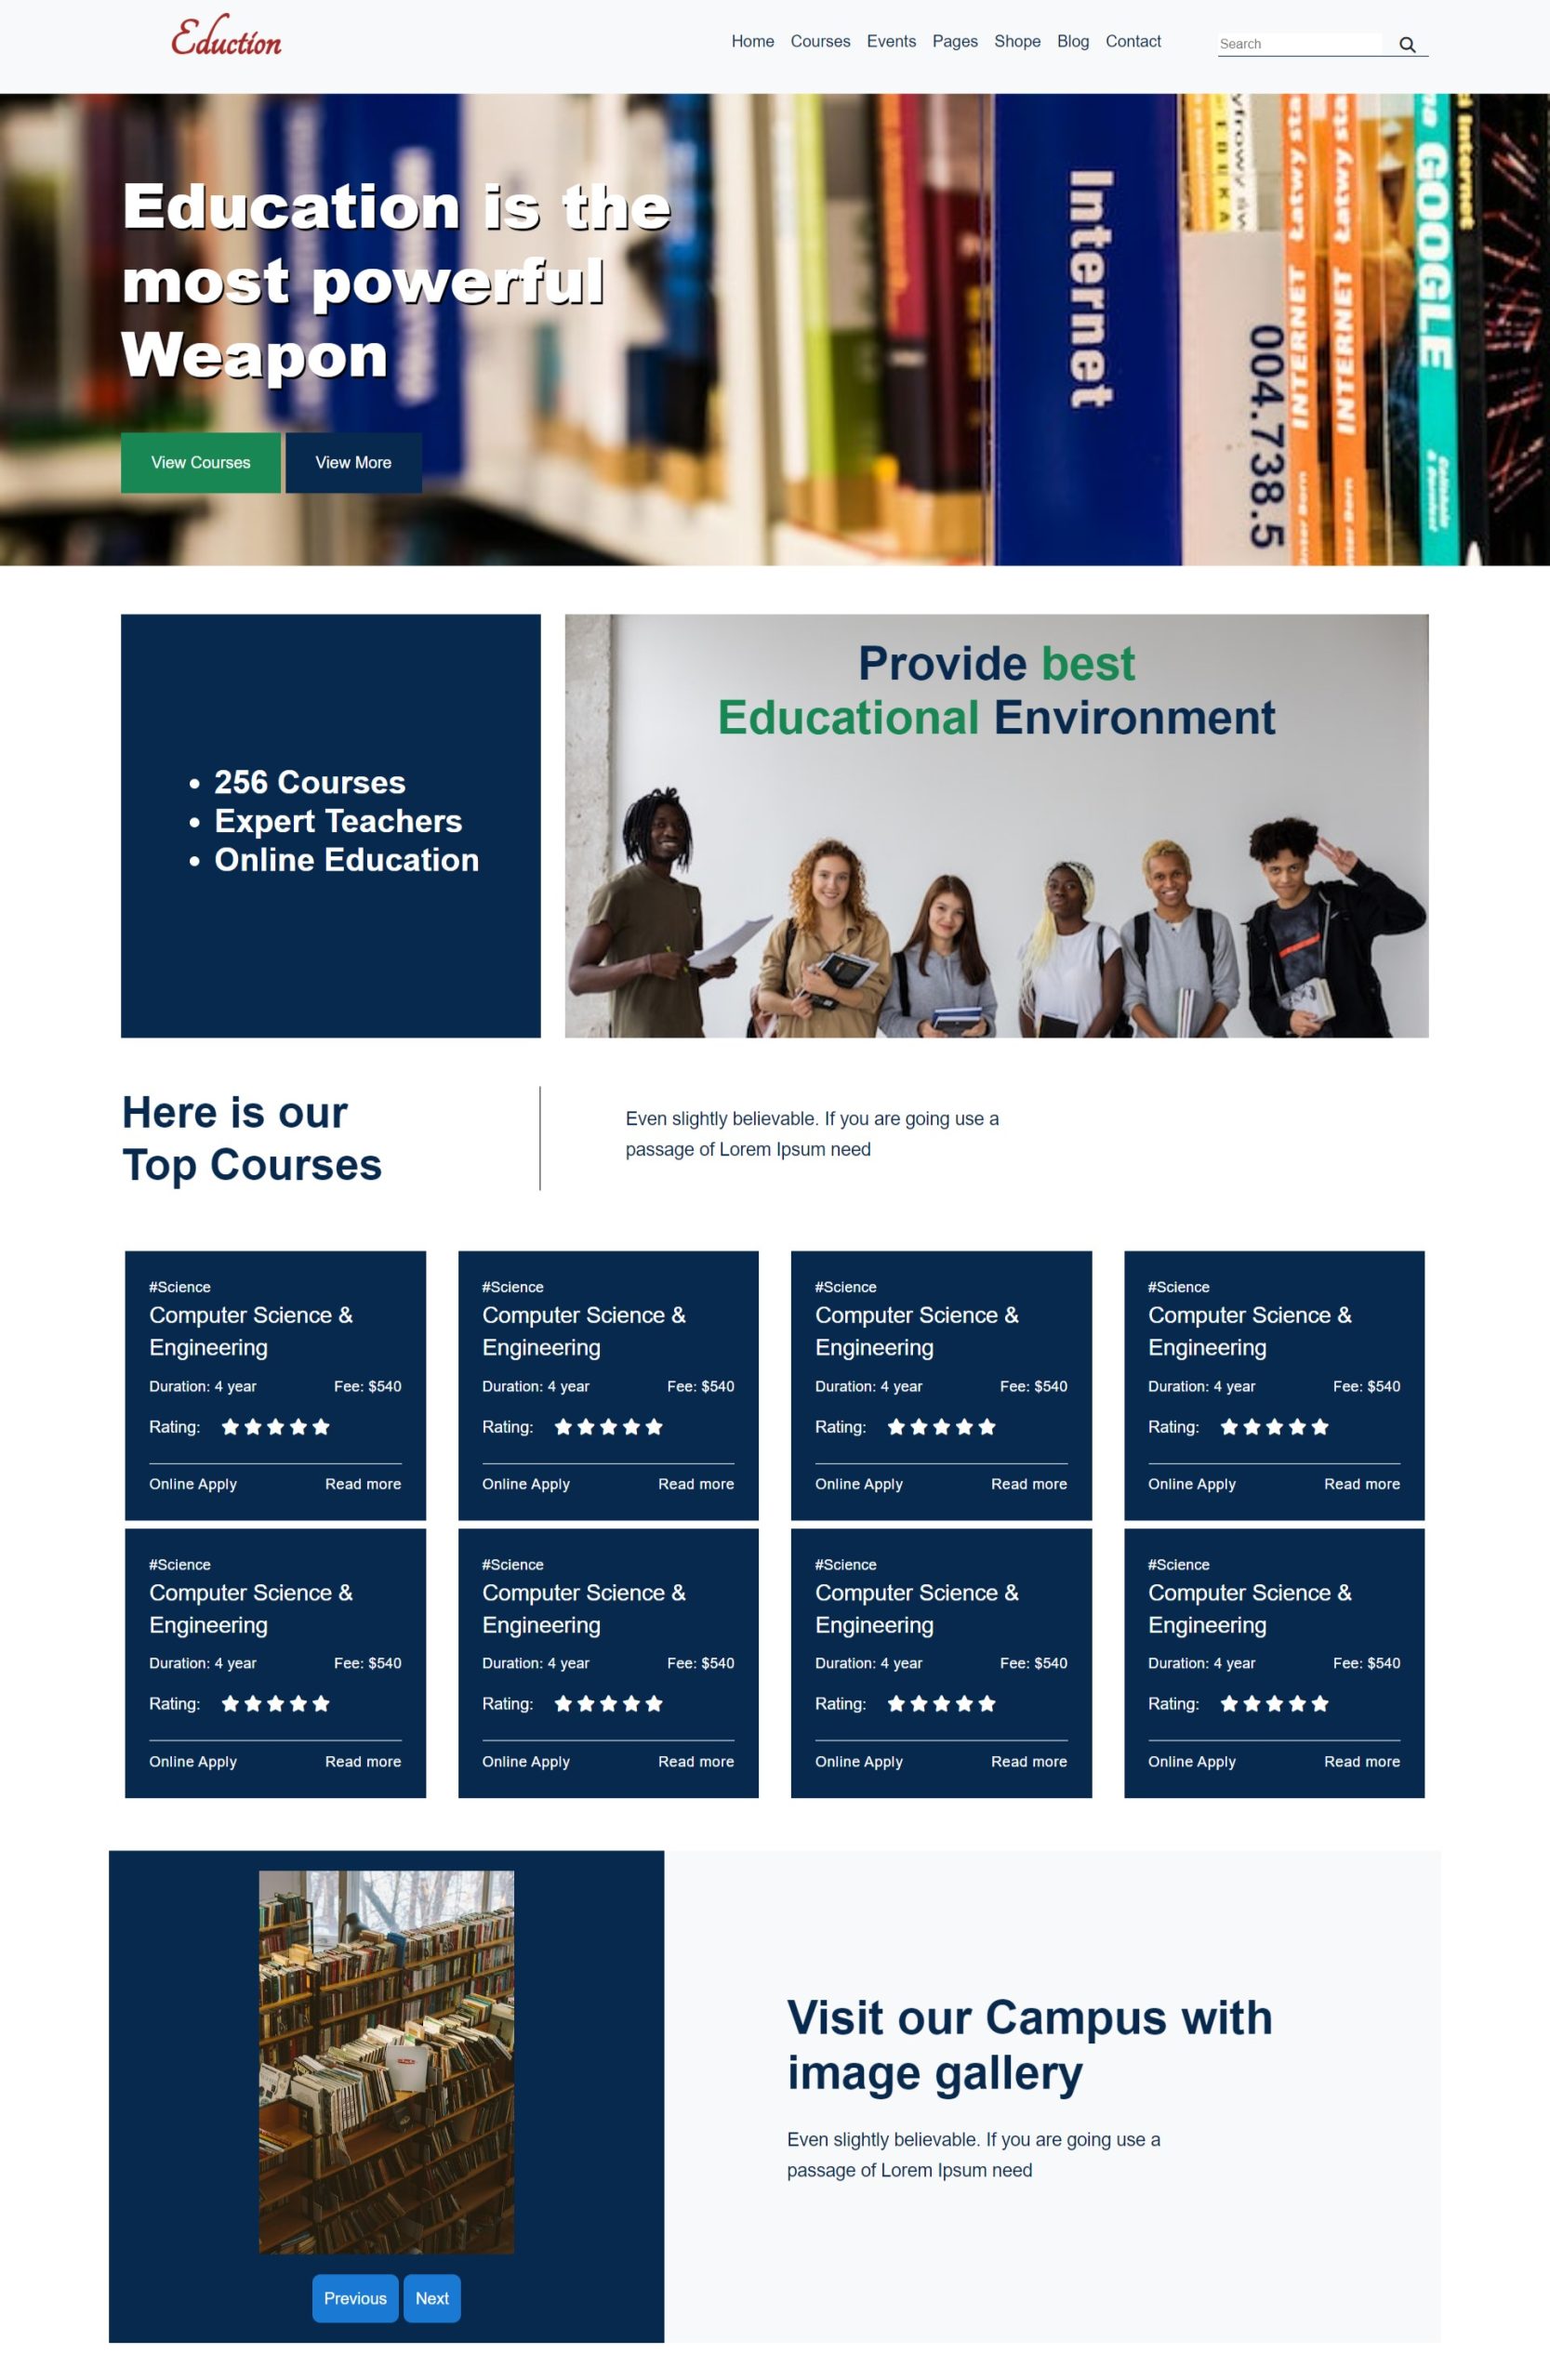 education website template free download, free school website template. school website html template free download, free website templates download